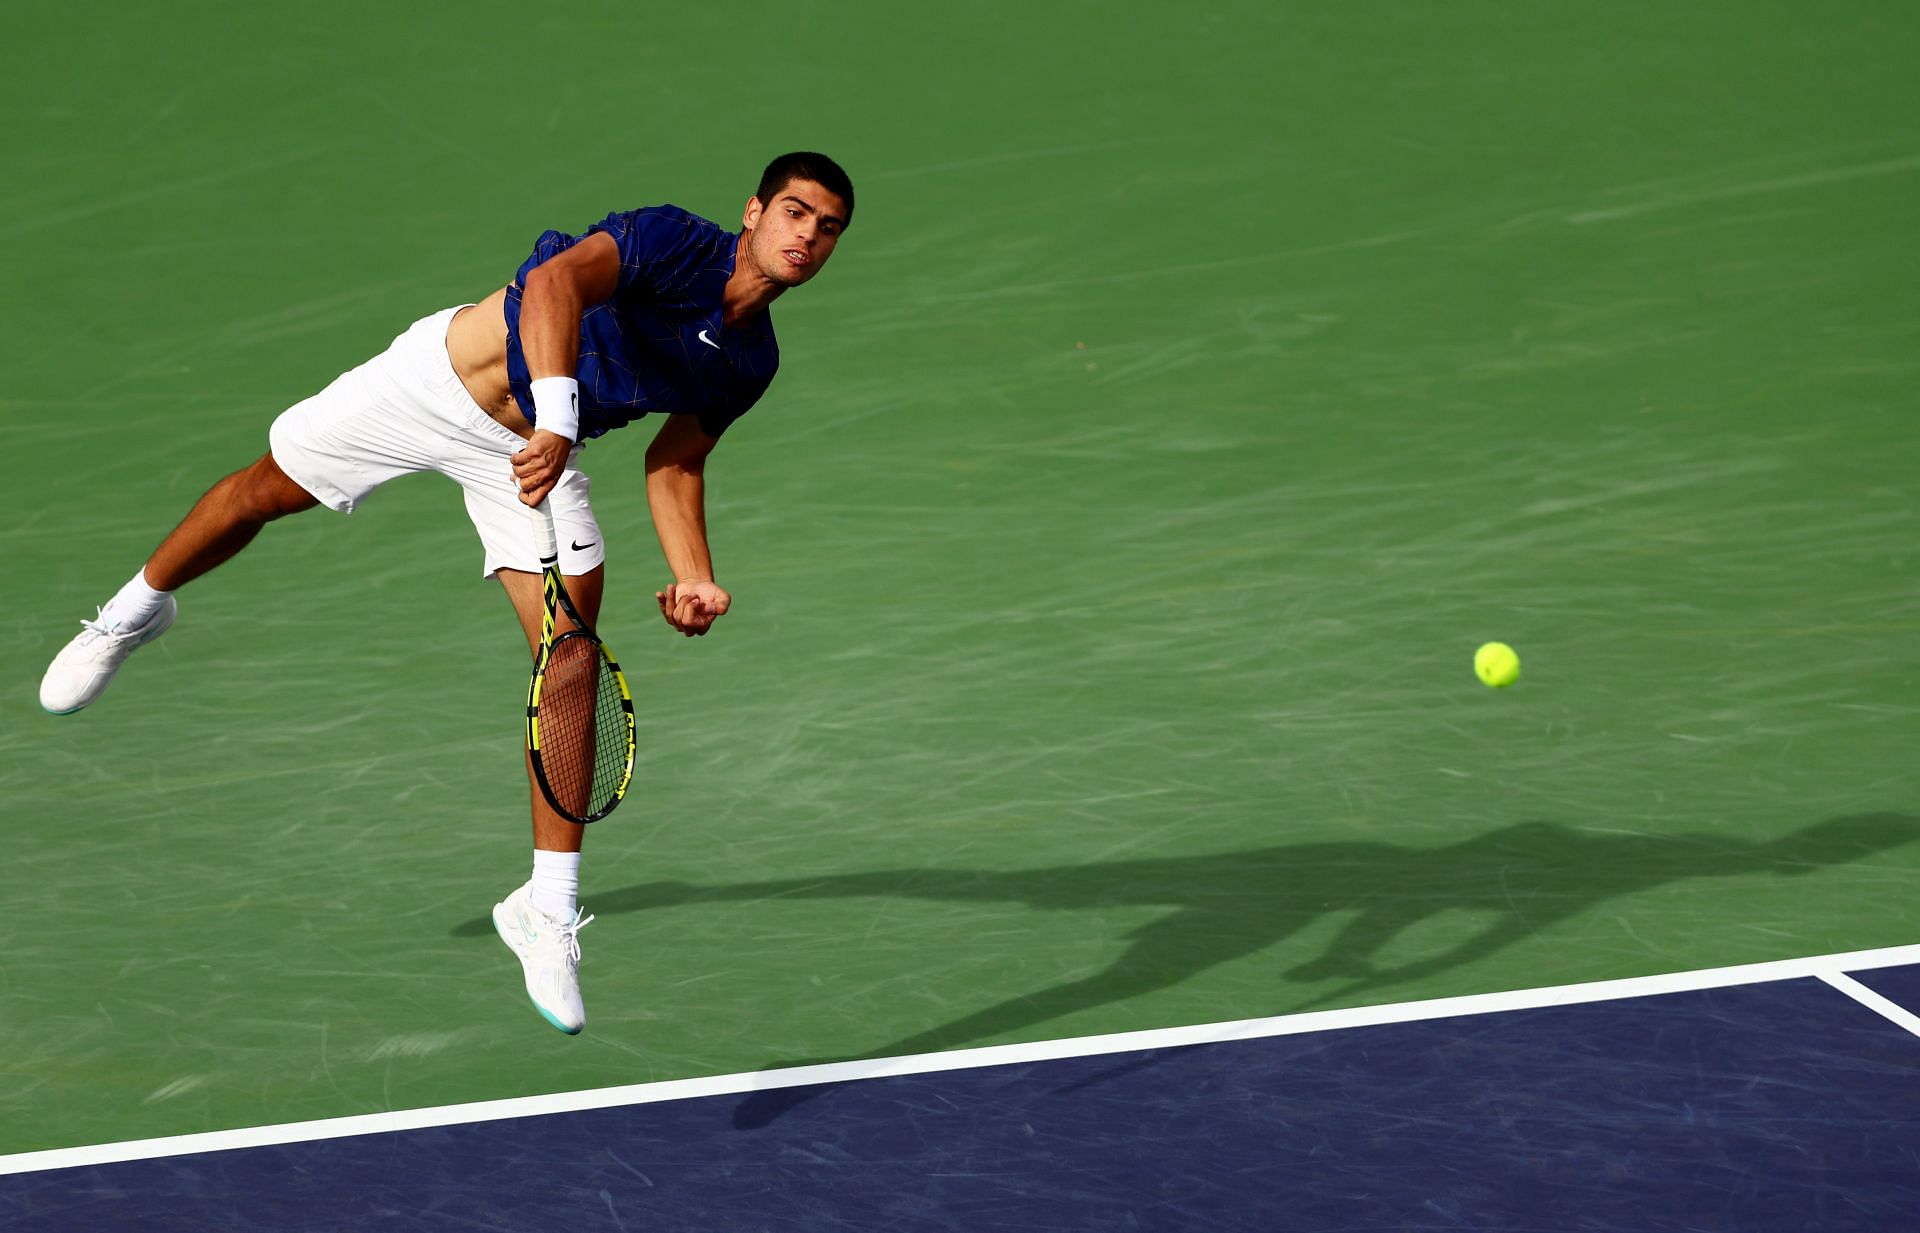 Carlos Alcaraz during his match with Nadal in the semifinals of the BNP Paribas Open